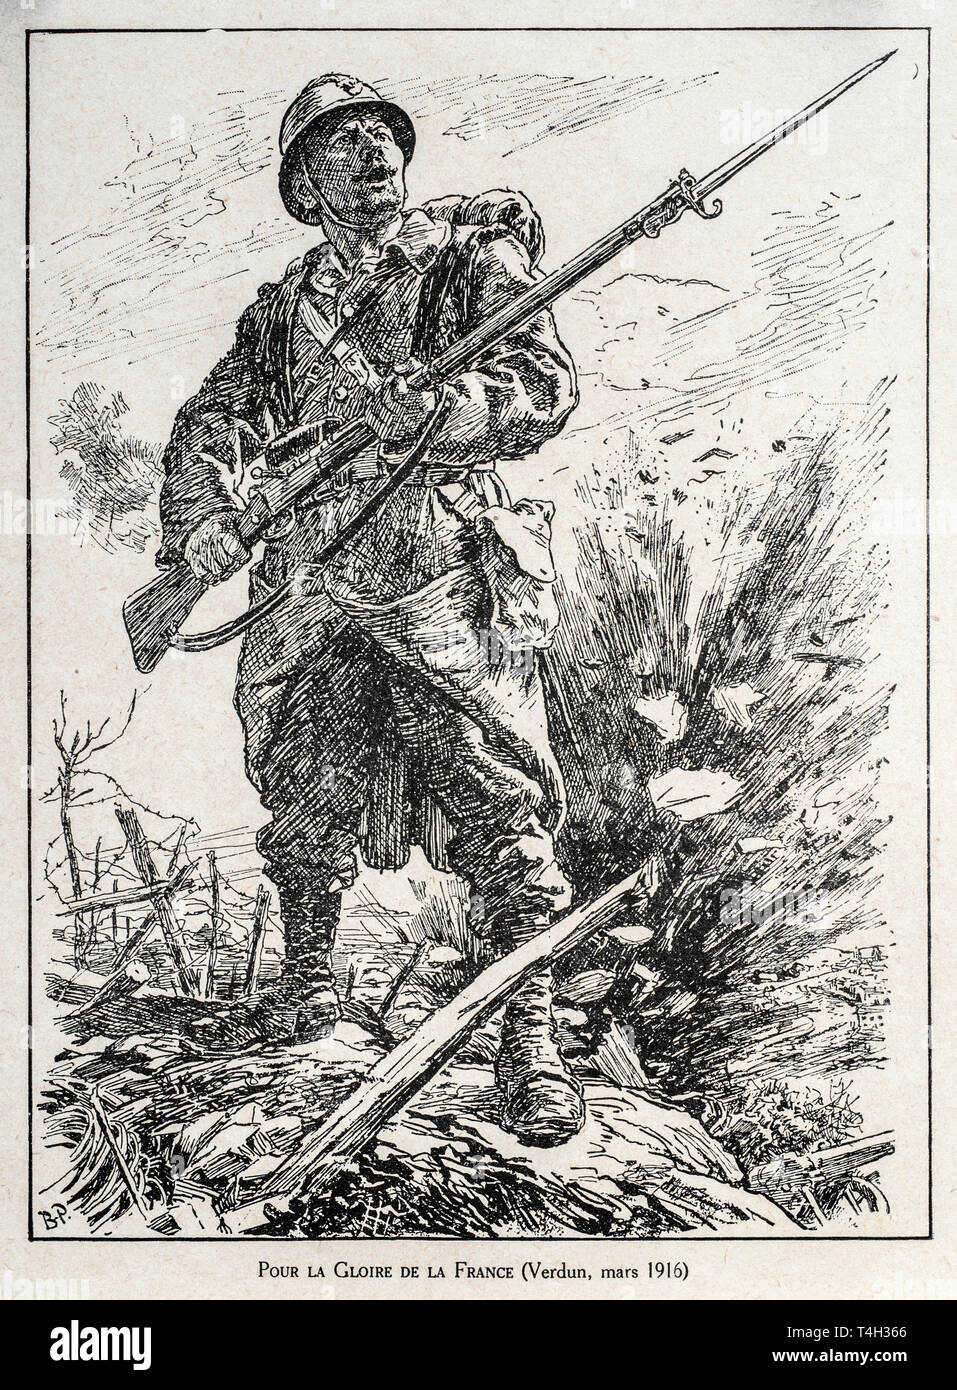 Pour la Gloire de la France / For France's Glory, WW1 drawing by English illustrator Bernard Partridge showing French soldier with rifle and bayonet Stock Photo